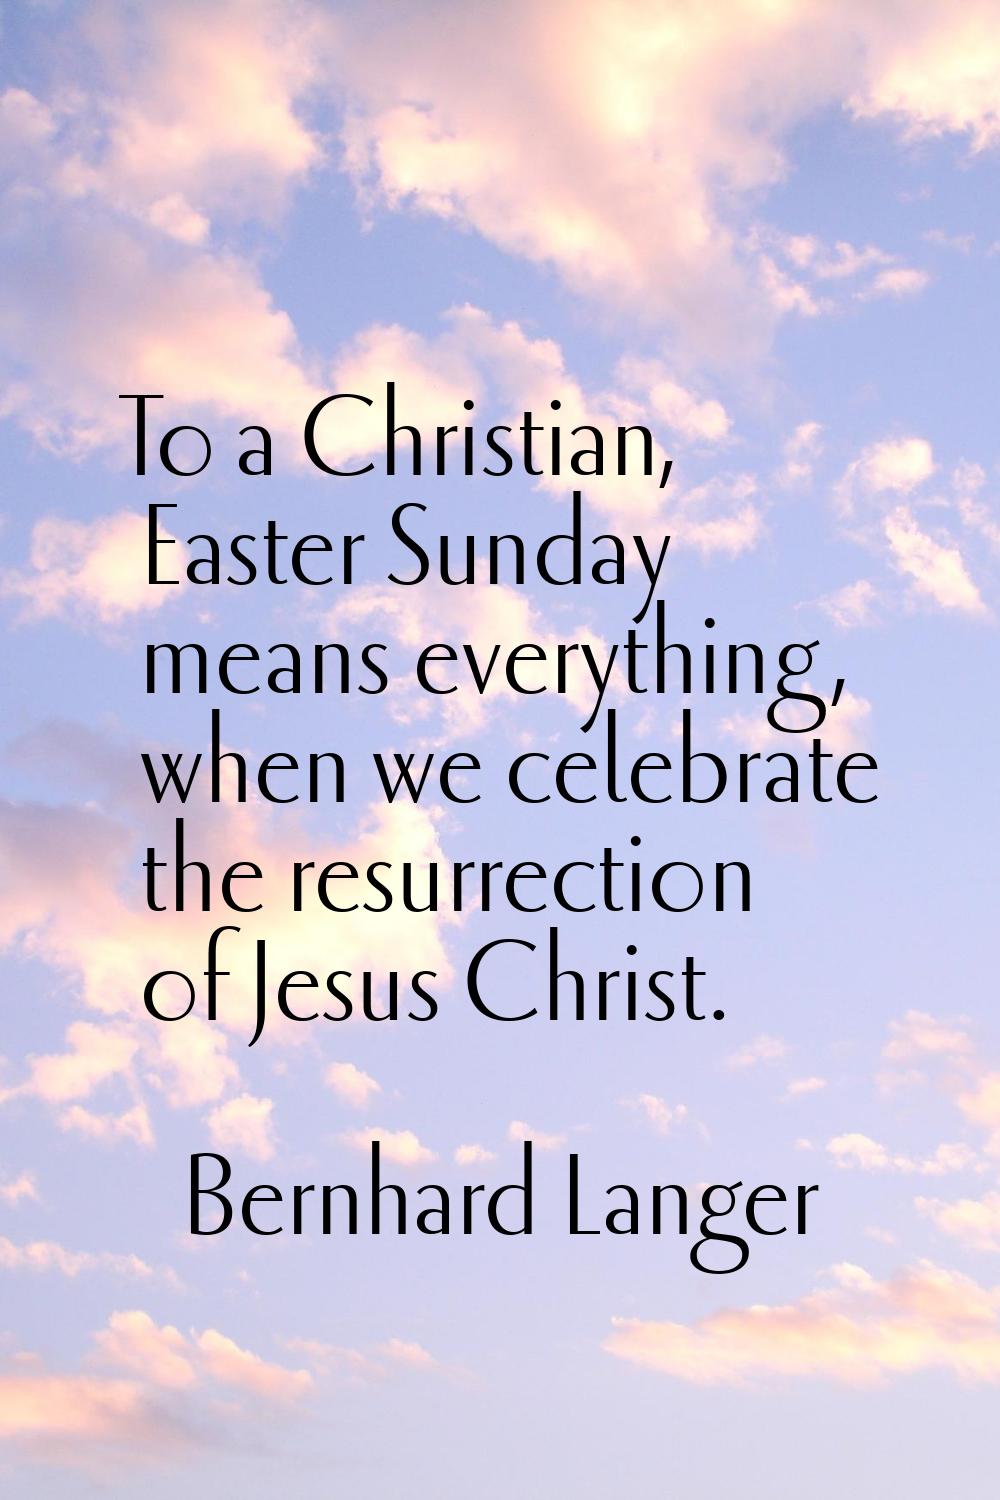 To a Christian, Easter Sunday means everything, when we celebrate the resurrection of Jesus Christ.